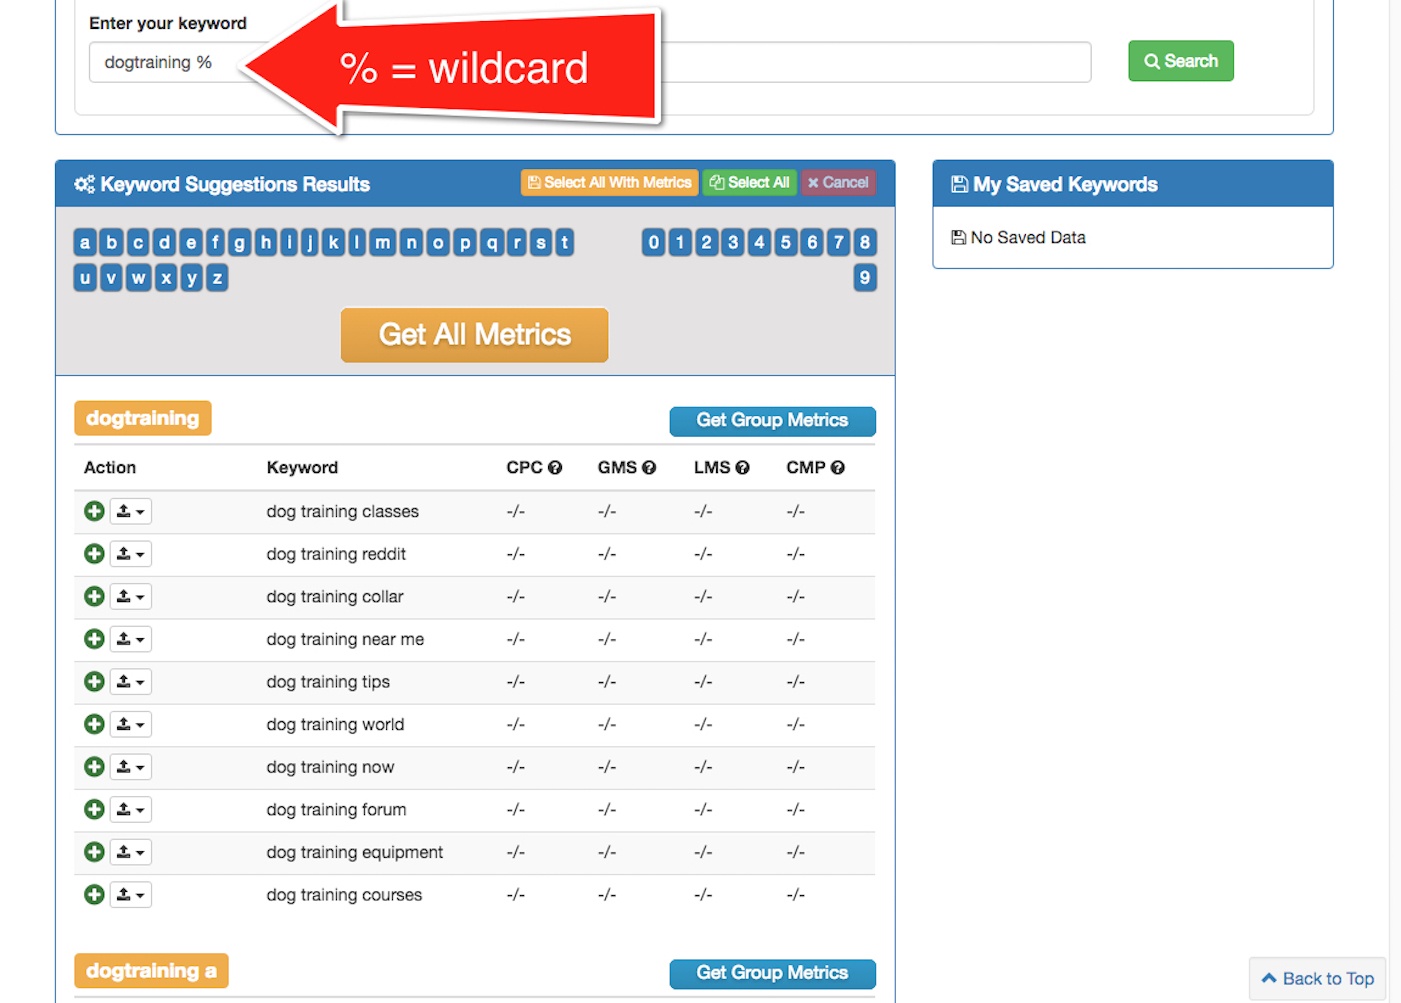 using a wildcard in your keyword search